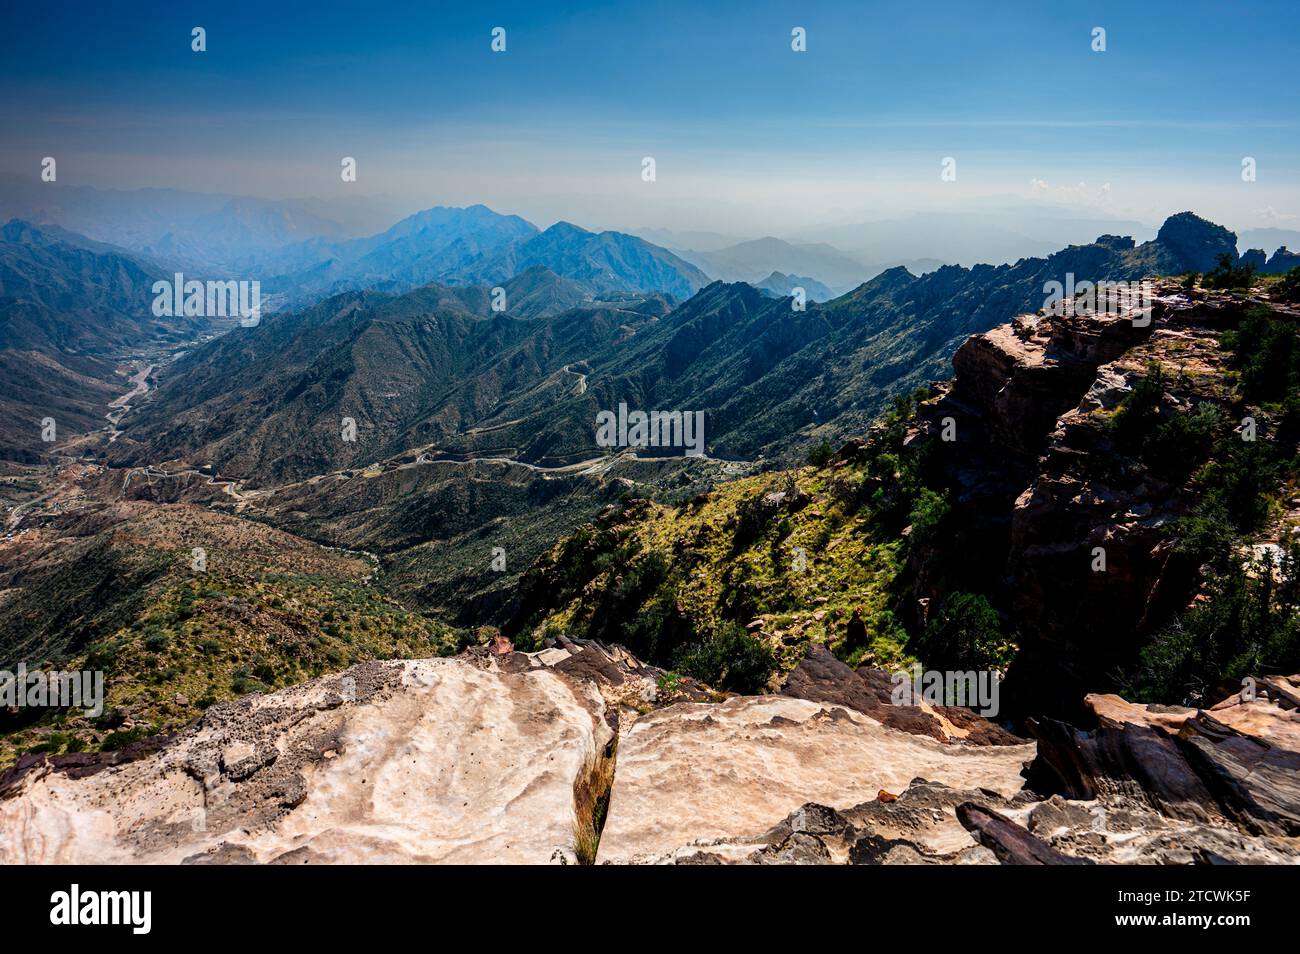 Landscape of the Asir Mountains in Saudi Arabia. Stock Photo